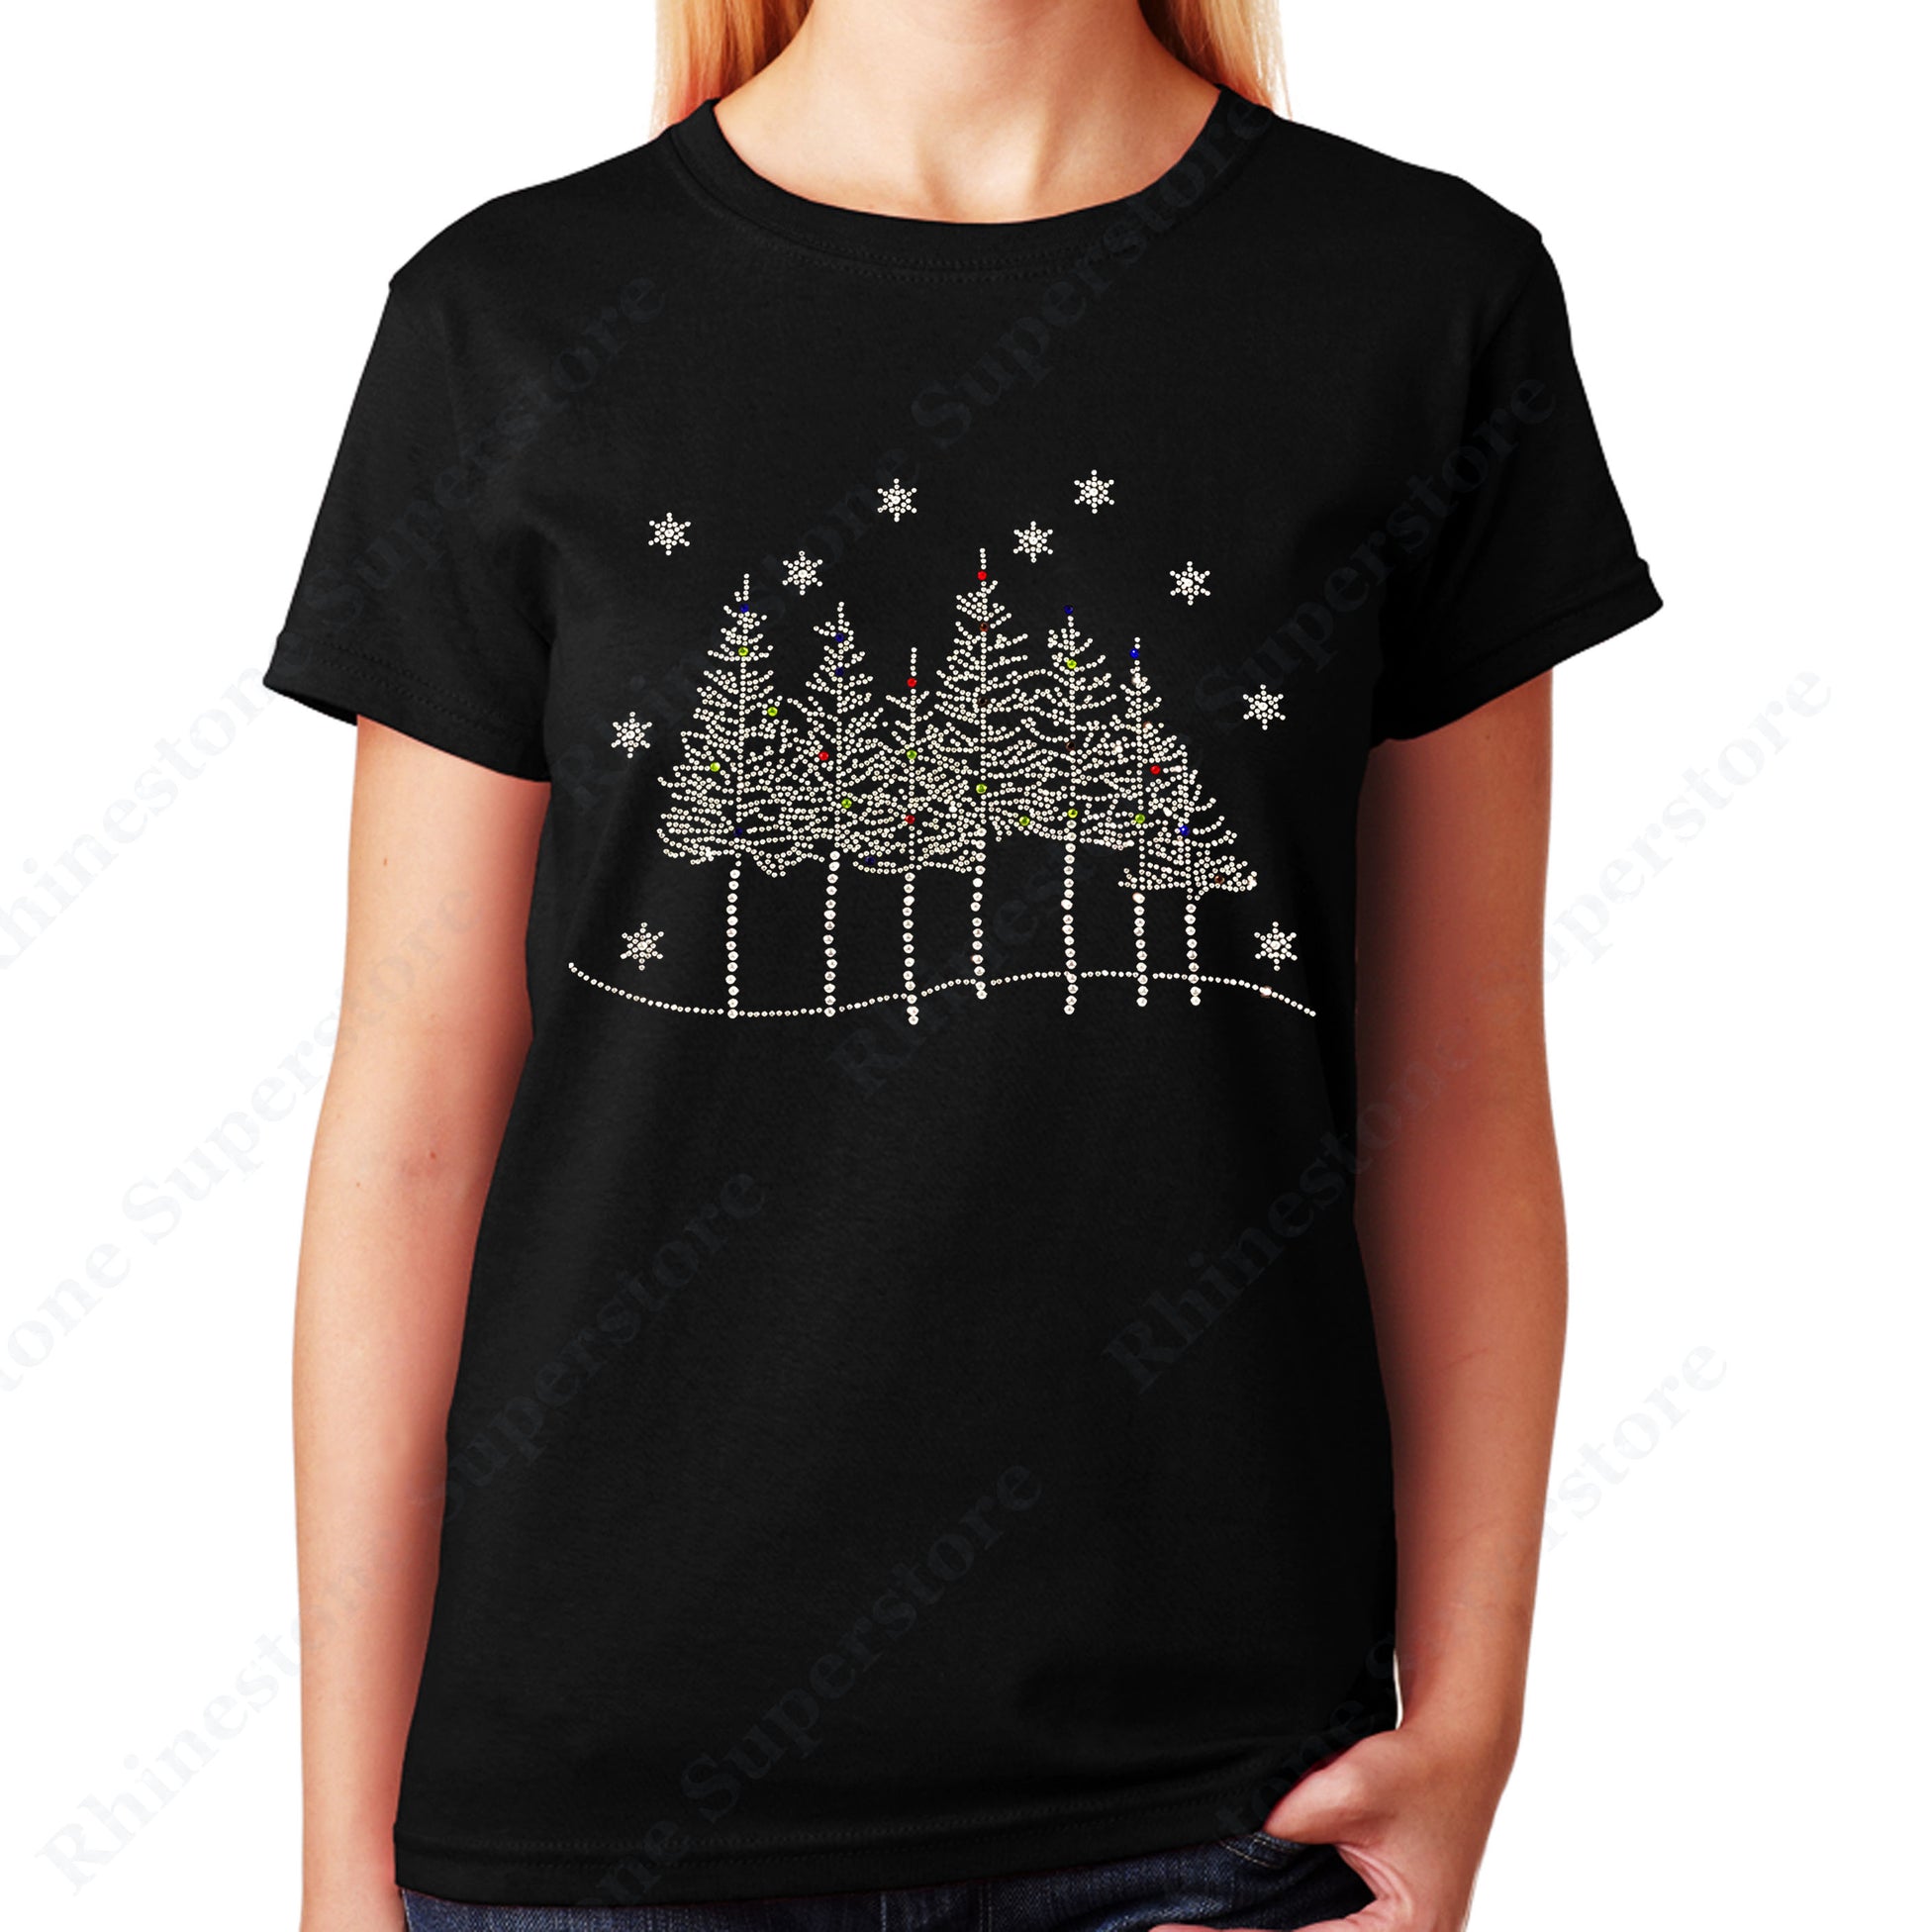 Unisex T-Shirt with Tree Line Scene with Snowflakes in Rhinestones